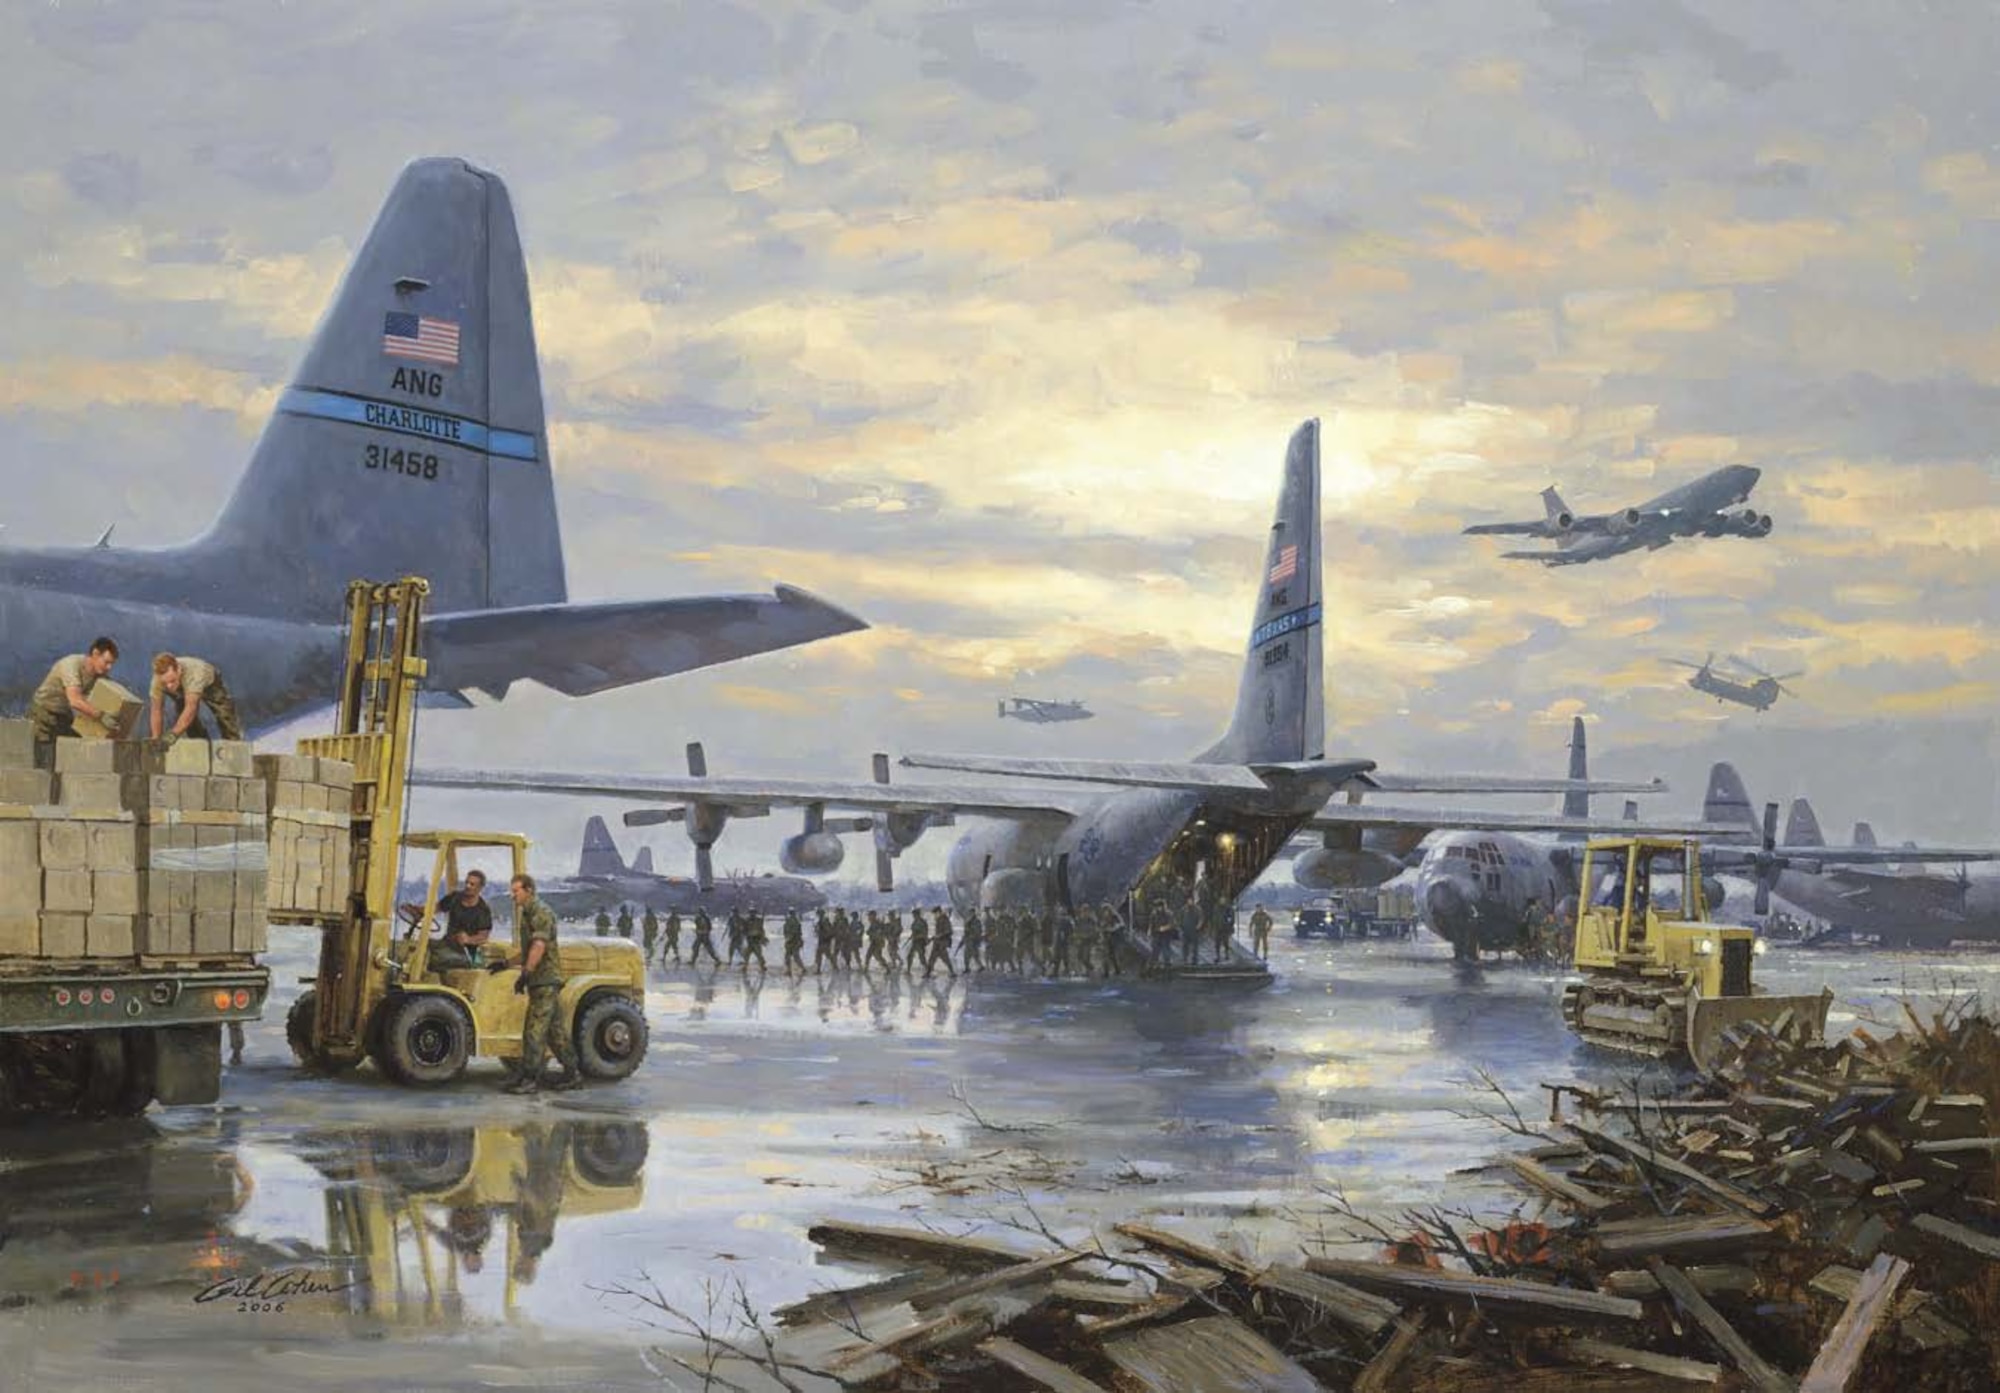 National Guard Heritage painting.
Air Force Art